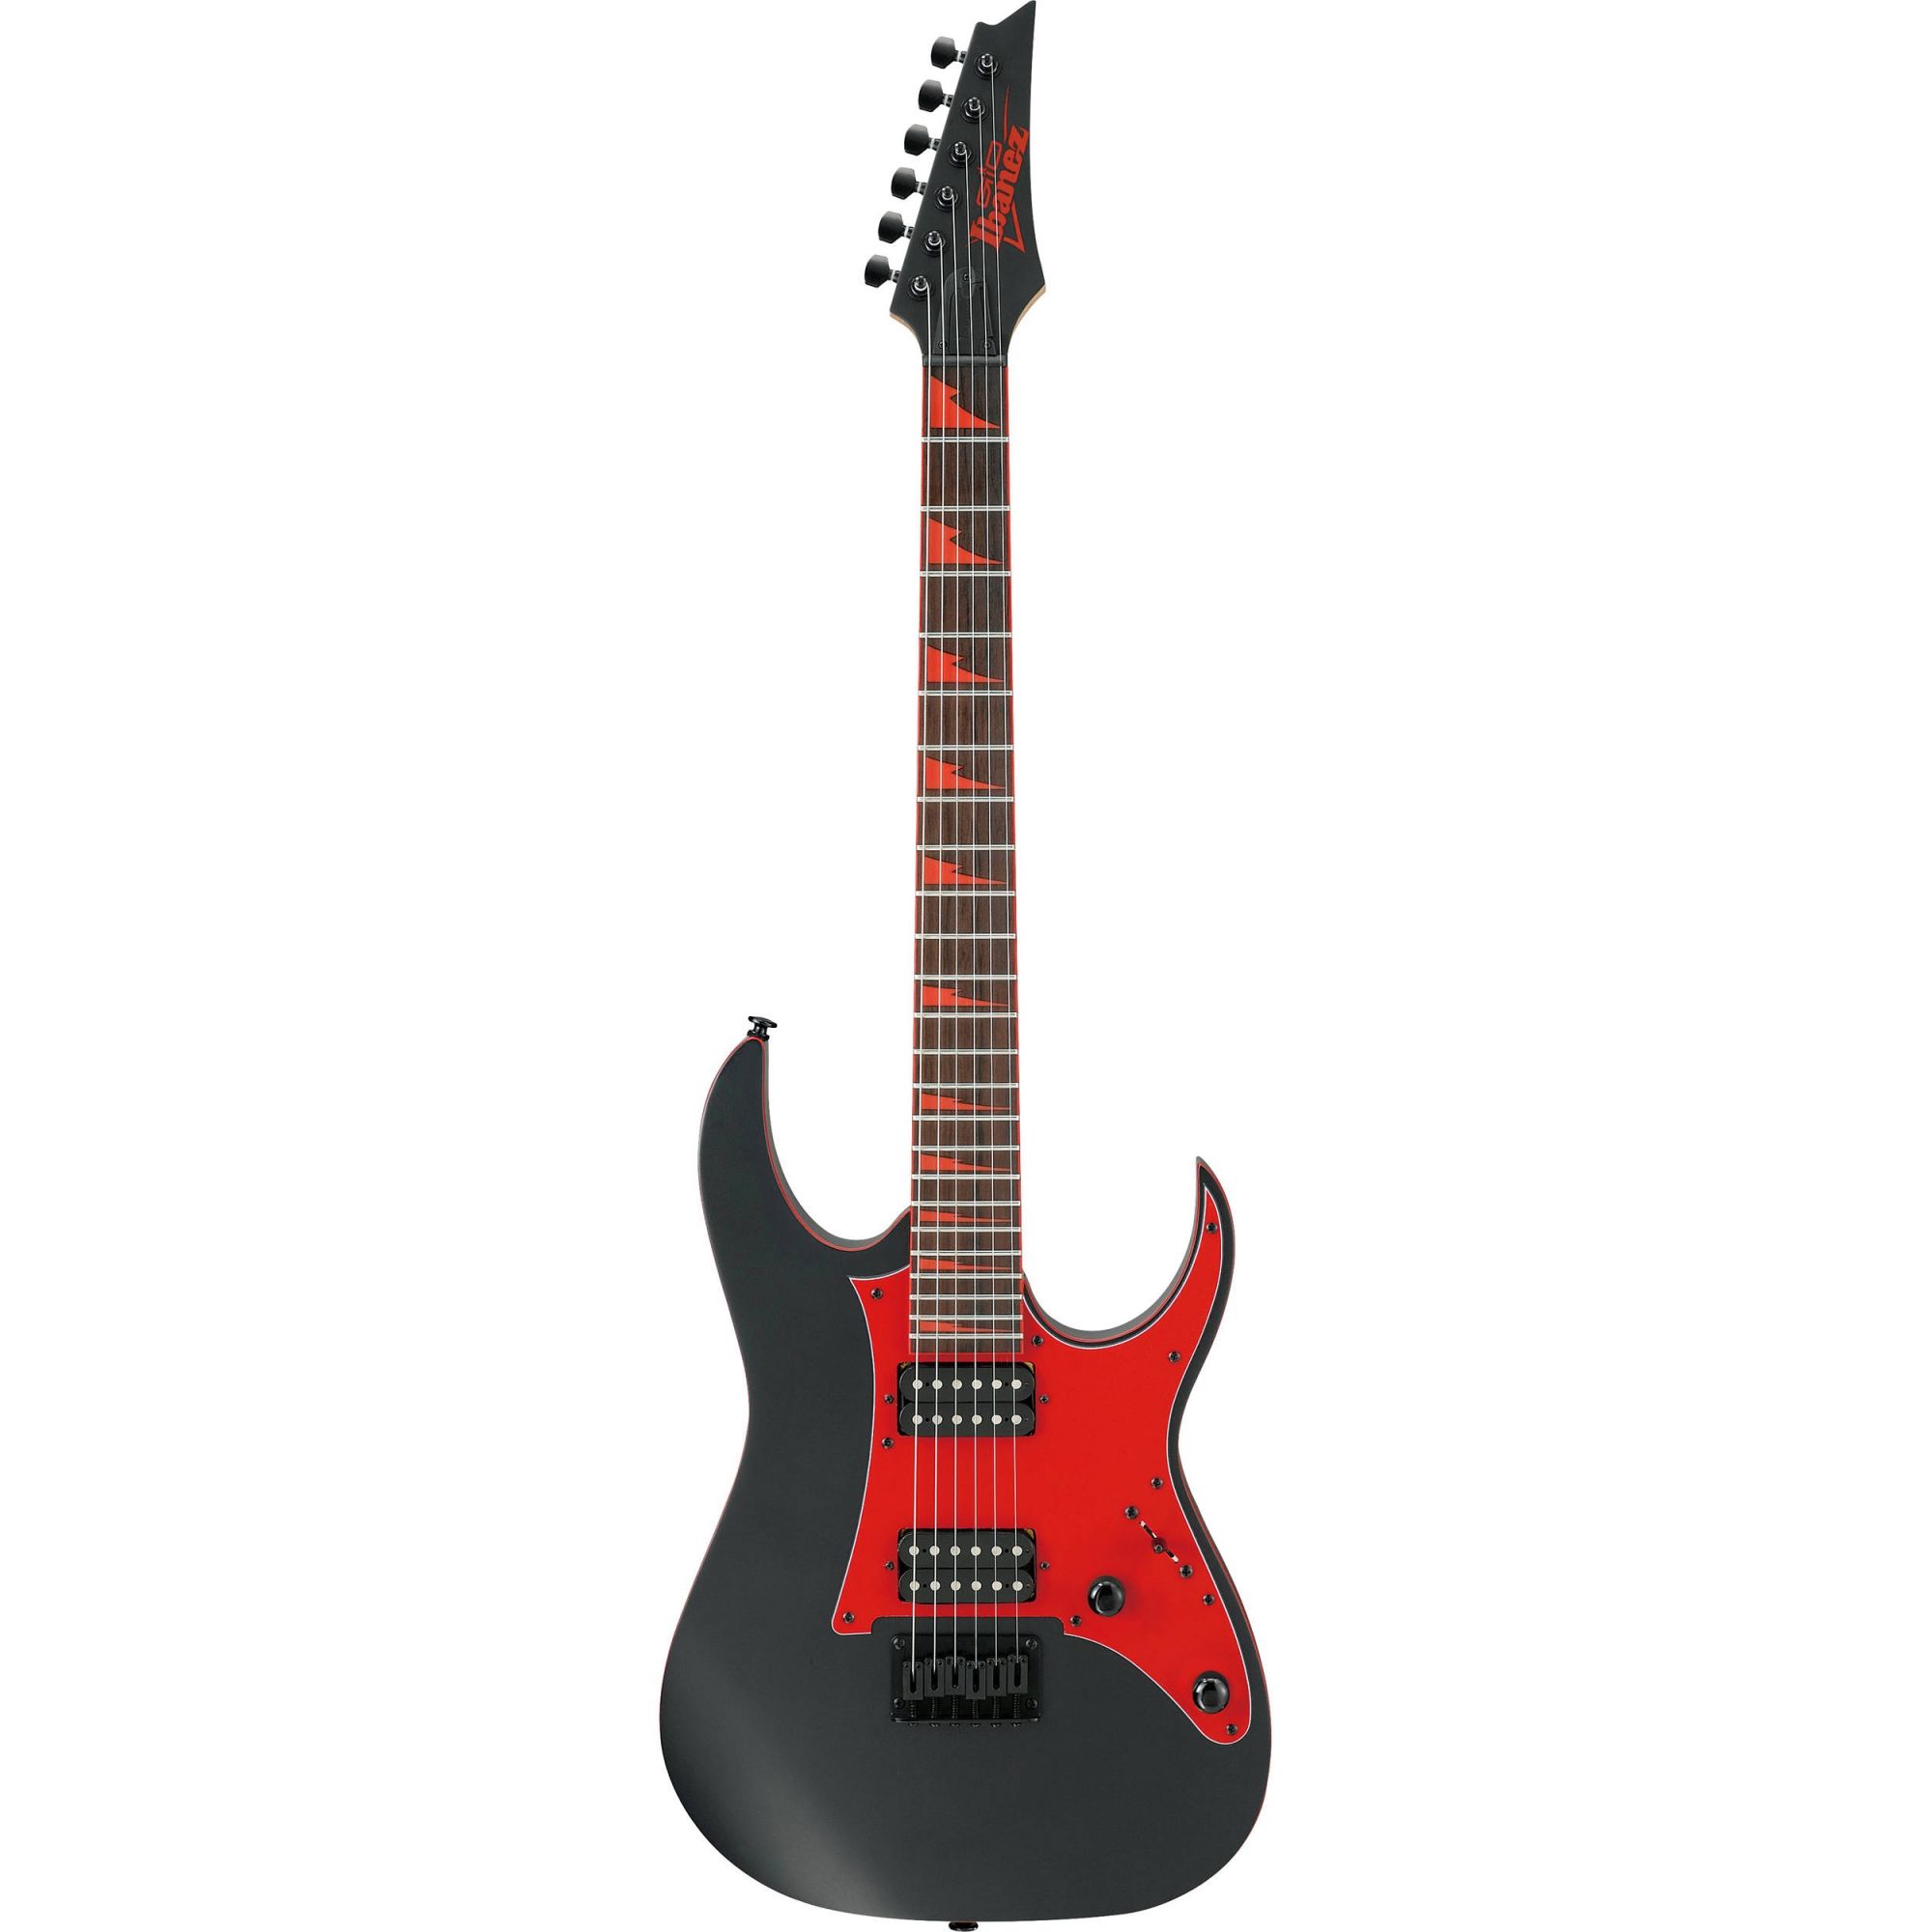 Ibanez GRG131DX electric guitar online in India